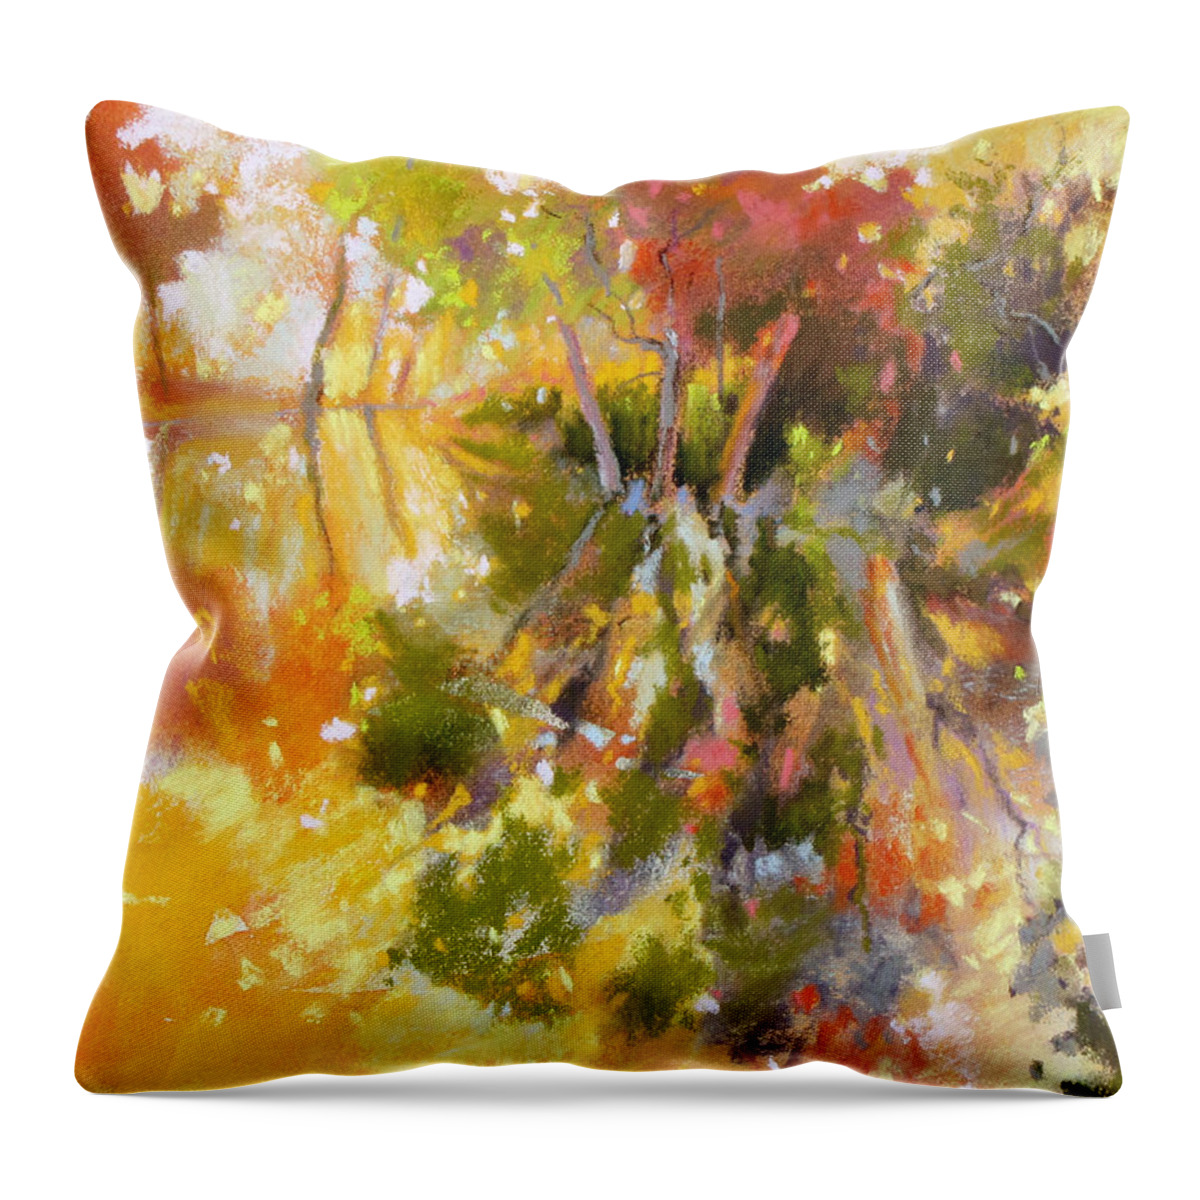 Water Throw Pillow featuring the painting Glow by Rae Andrews